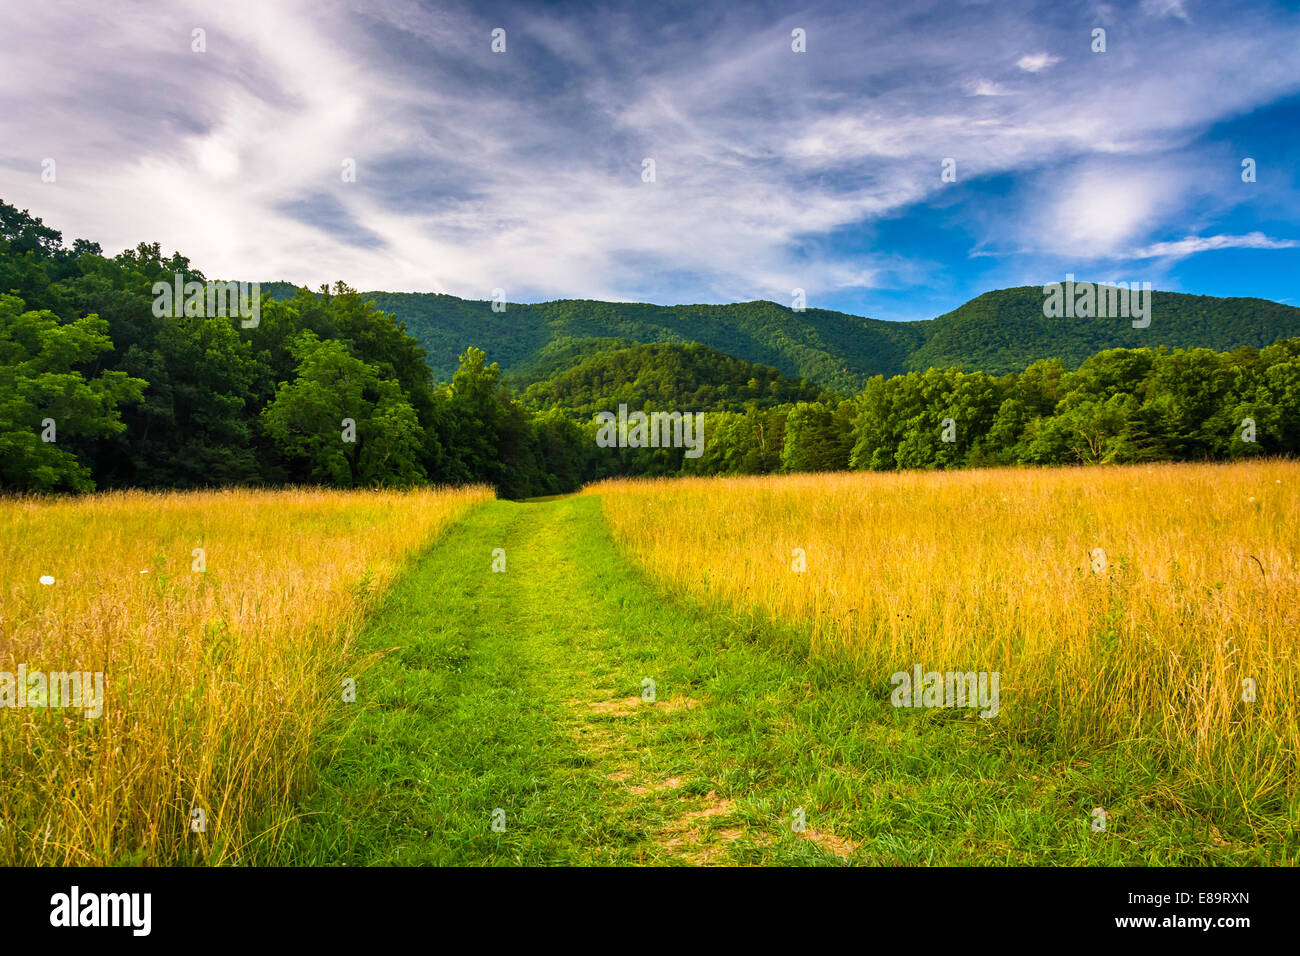 Field and mountains at Cade's Cove, Great Smoky Mountains National Park, Tennessee. Stock Photo